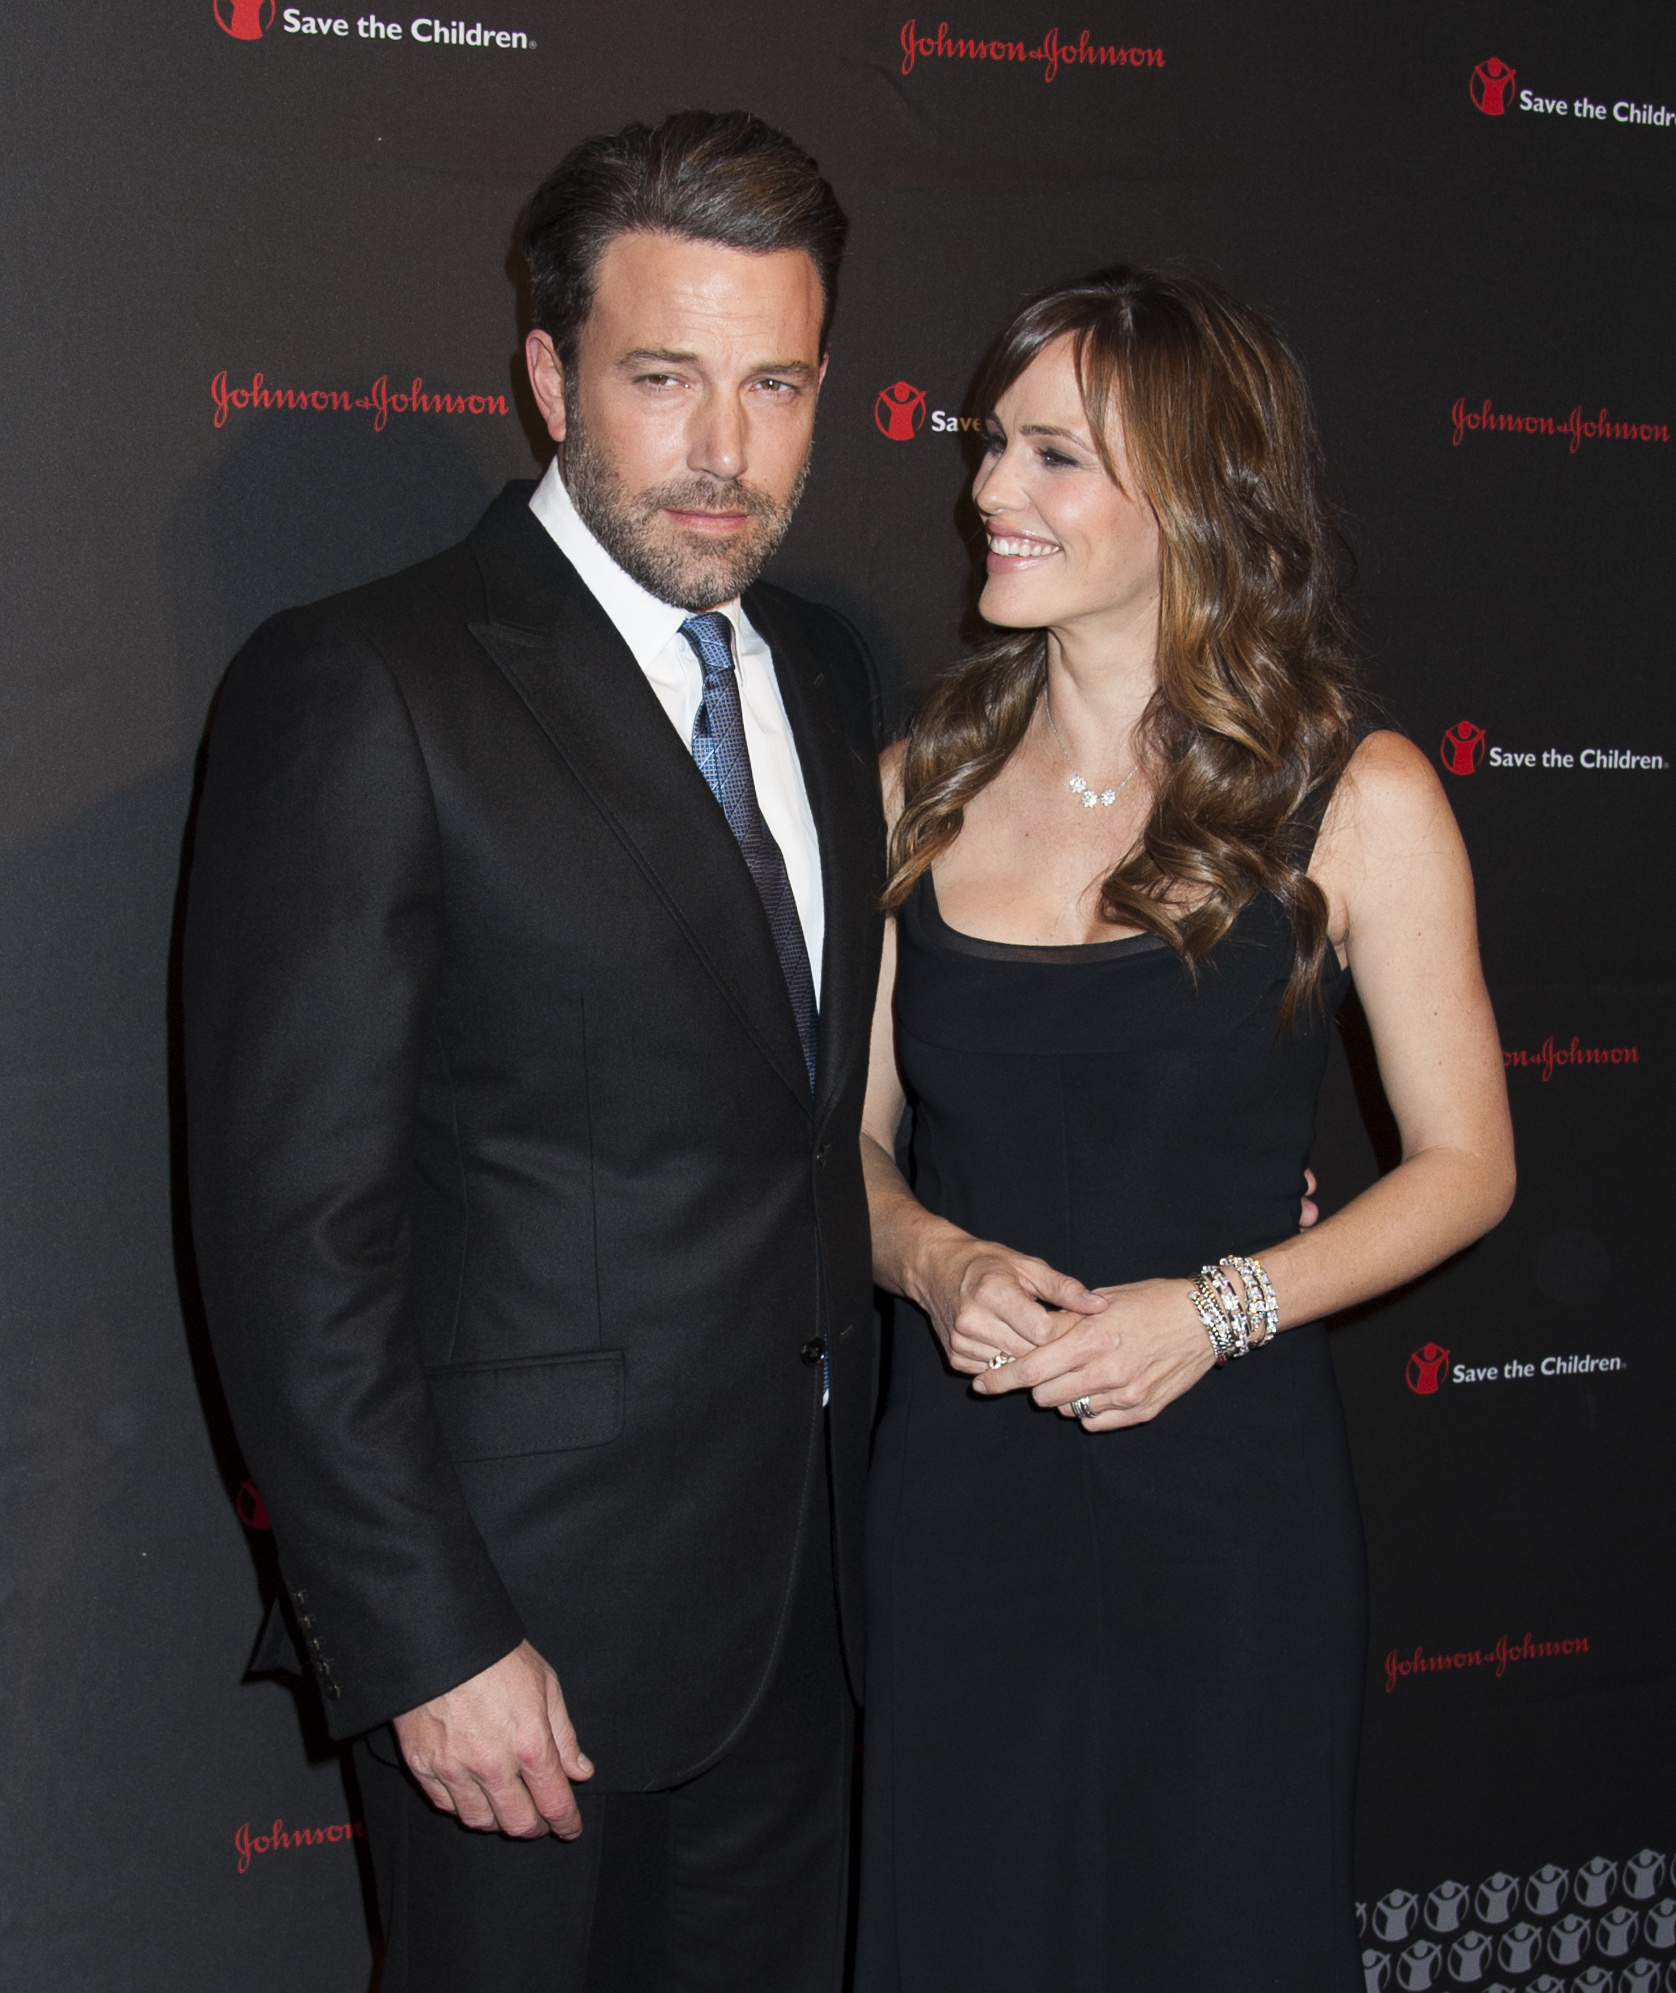 <p>Ben Affleck and Jennifer Garner created a media frenzy when they announced plans to divorce in June 2015 after 10 years of marriage. Shortly after confirming their separation, reports surfaced claiming that Ben cheated on Jen with their children's nanny. Jen addressed the claims in an interview with <a href="https://www.vanityfair.com/hollywood/2016/02/jennifer-garner-talks-kids-career-ben-affleck#1">Vanity Fair</a>, saying that the alleged affair had "nothing to do with our decision to divorce." Then in July 2017 when Ben went public with girlfriend Lindsay Shookus a few months after he and Jen finally started the process of legally ending their marriage, multiple outlets reported that he and the "Saturday Night Live" producer had actually started their romance years earlier -- back <a href="https://www.wonderwall.com/celebrity/couples/carrie-underwood-celebrates-wedding-anniversary-ben-affleck-girlfriend-more-love-life-updates-week-july-2017-3007950.gallery?photoId=1007210">when both were married</a> to other people. Ben and Lindsay split in the summer of 2018, spent time together again in early 2019 then finally parted ways for good. </p>